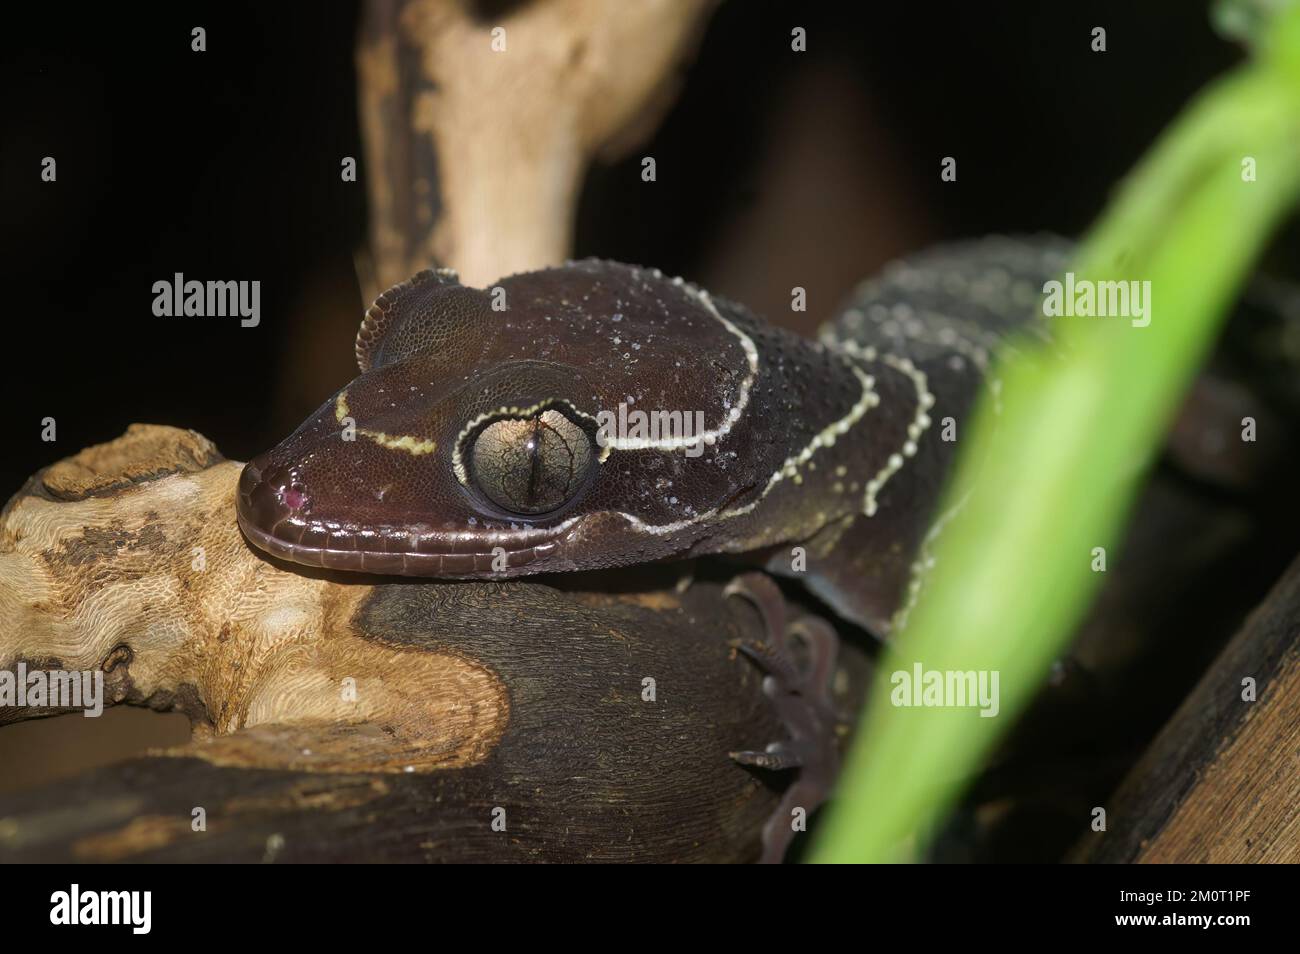 Closeup on the head of a Malayan forest or banded bent-toed gecko Cyrtodactylus pulchellus Stock Photo